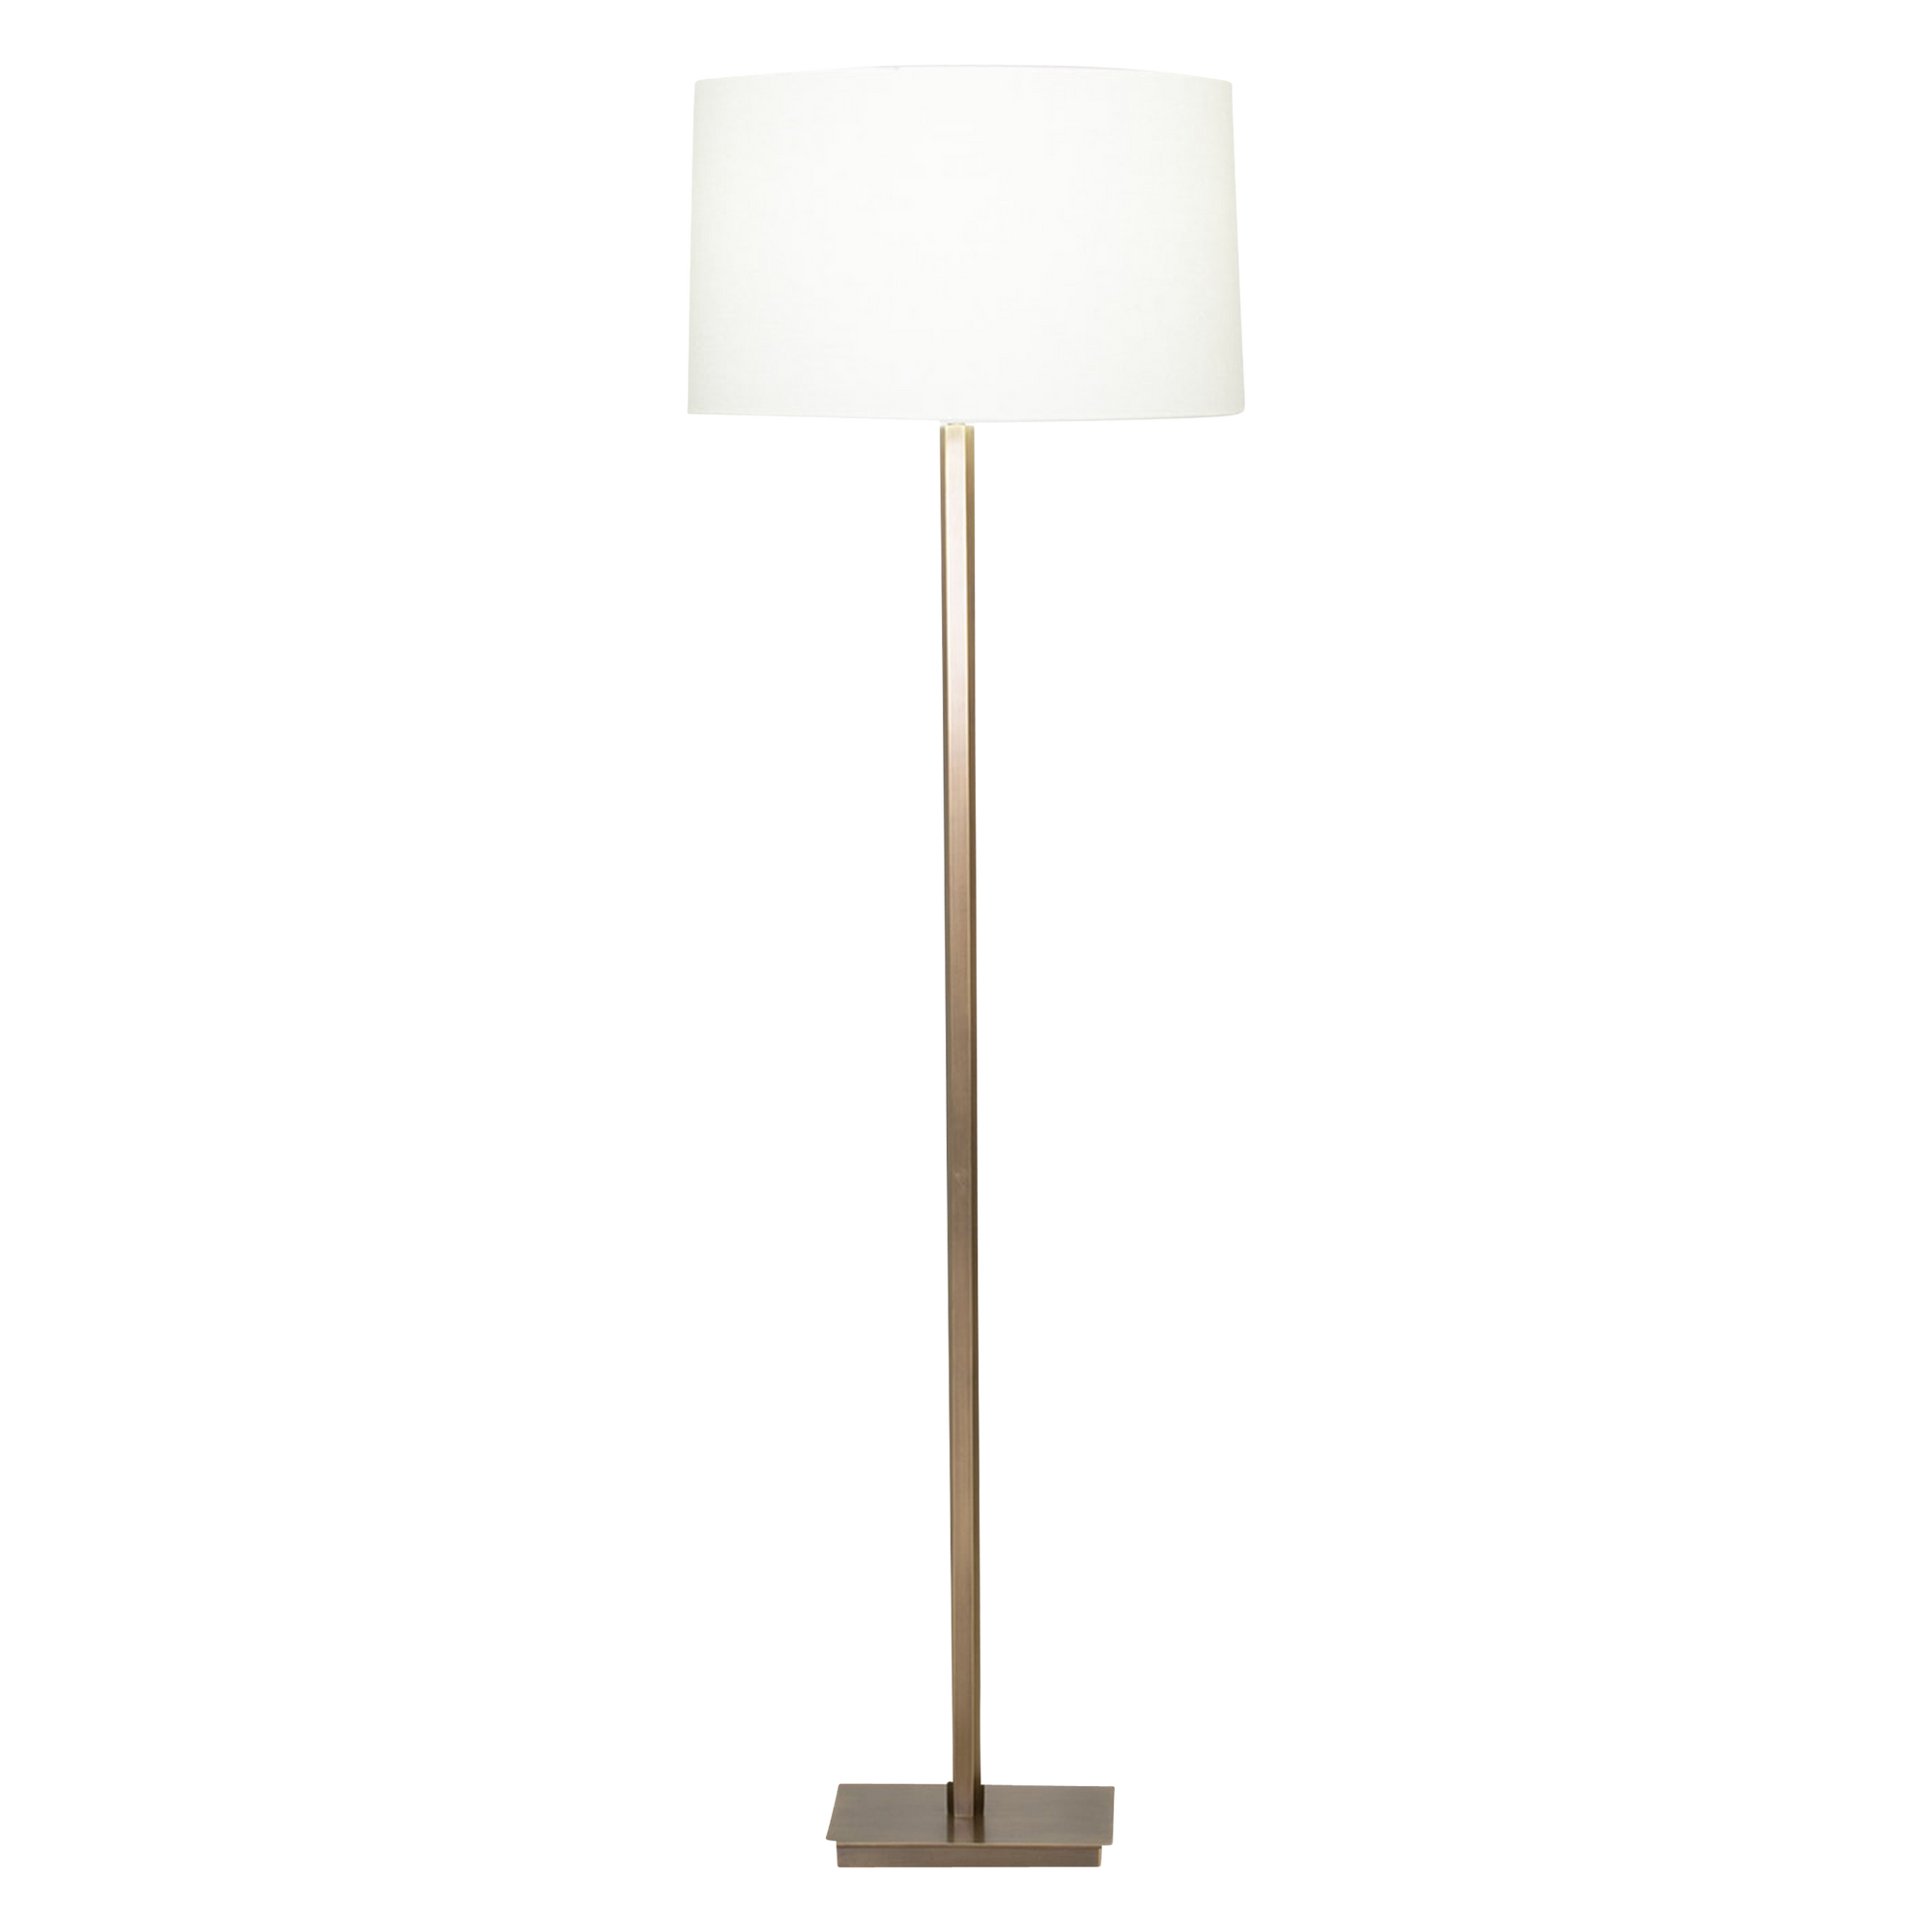 A sleek floor lamp that features an aged brass finish and a contrasting natural paper lamp shade.